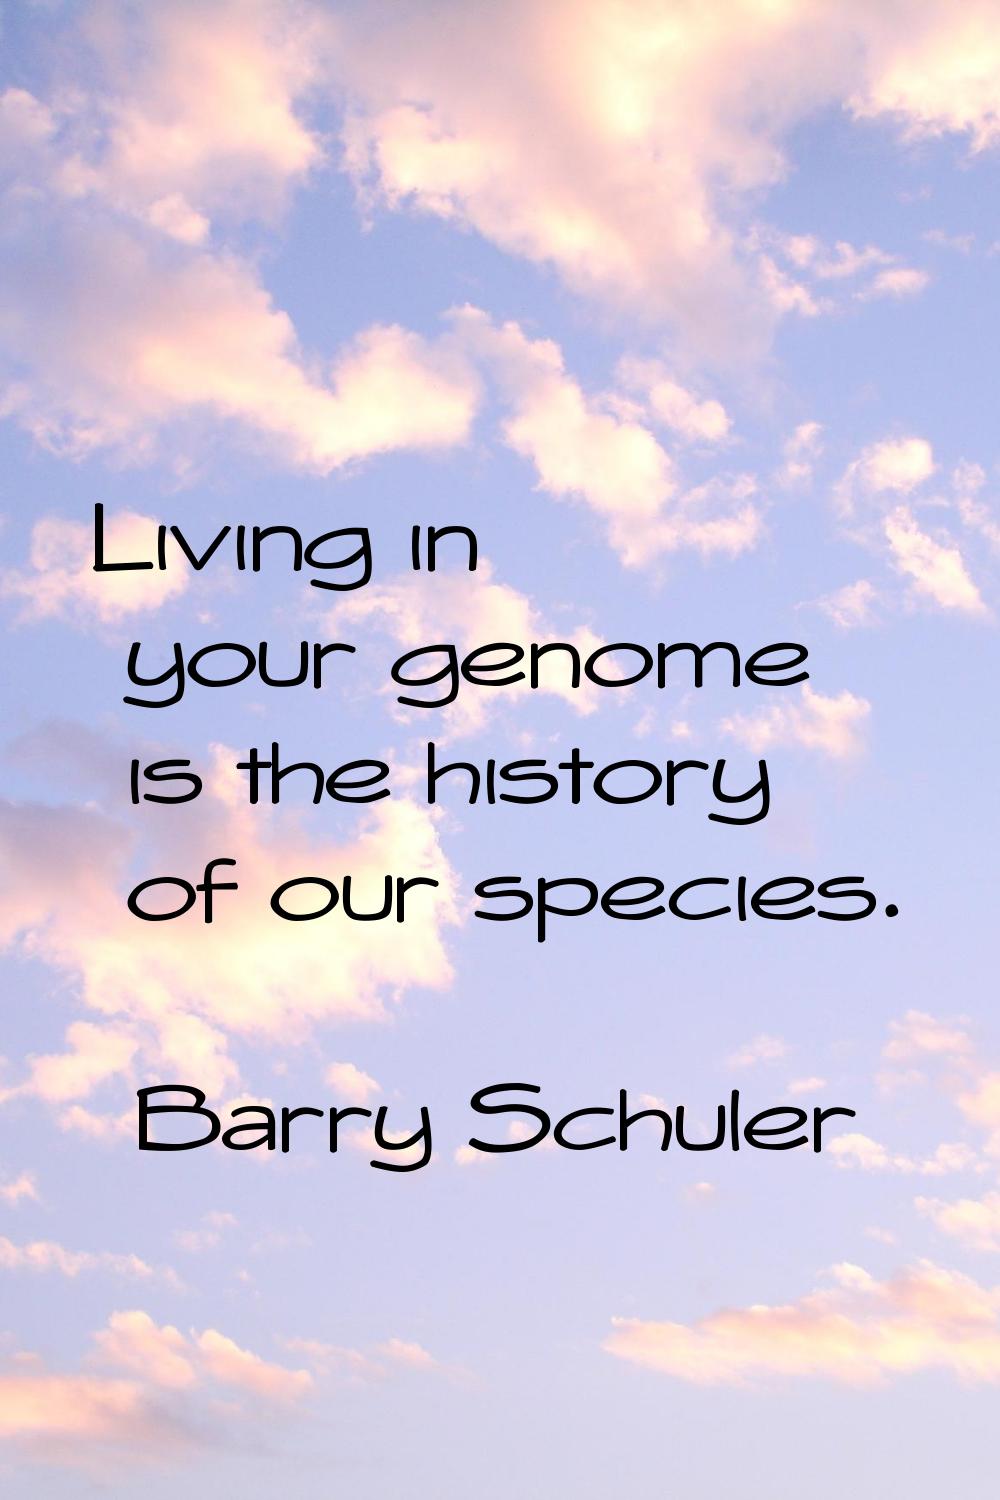 Living in your genome is the history of our species.